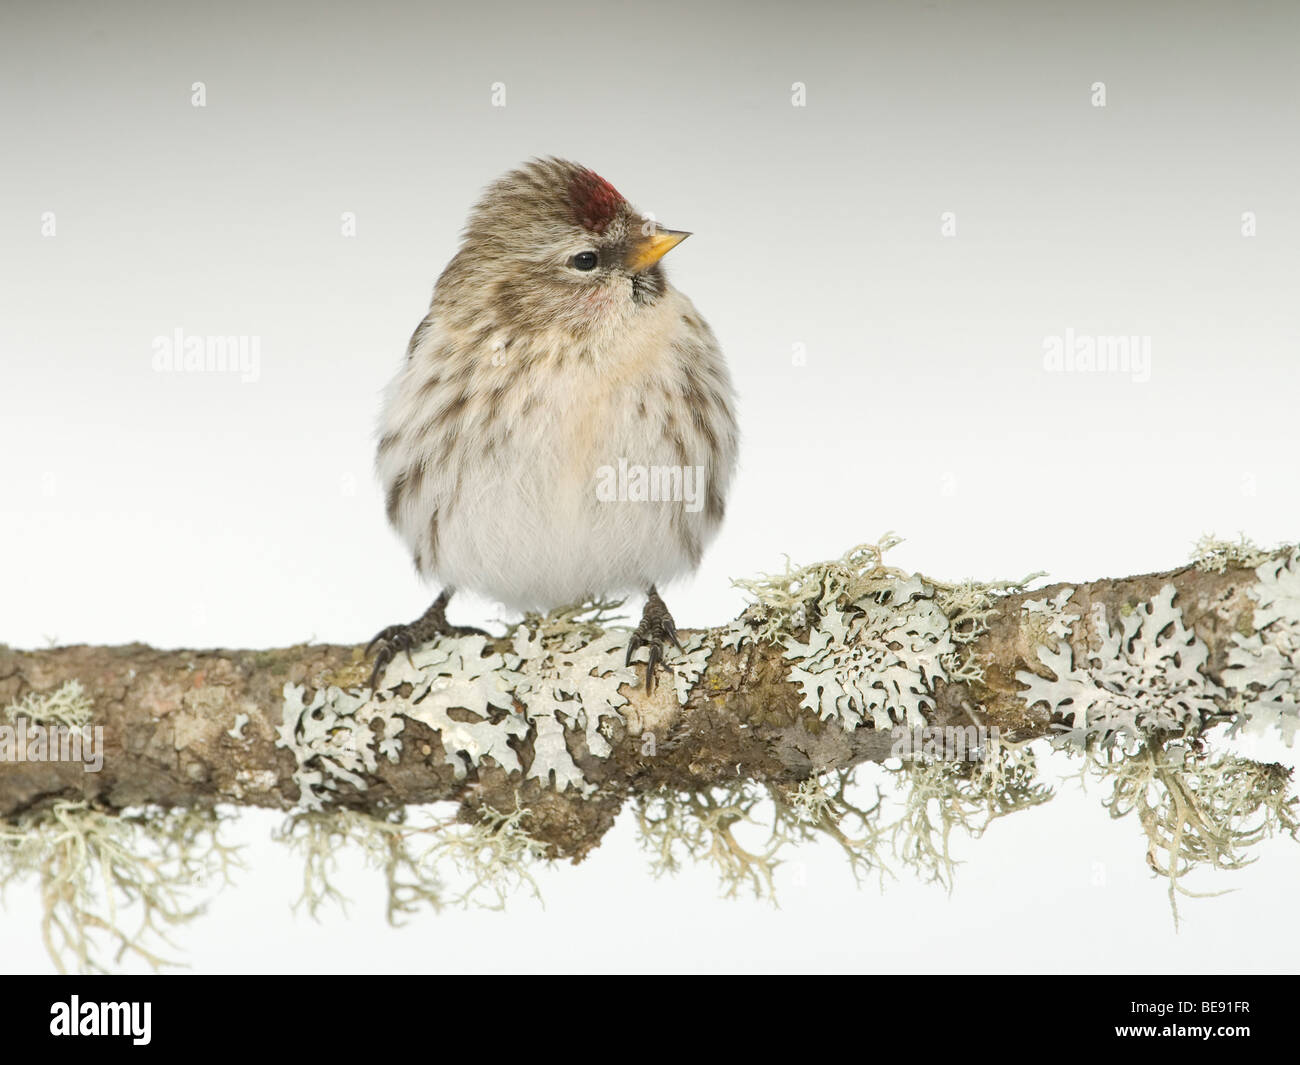 Een grote Barmsijs zittend op een tak;A Mealy Redpoll sitting om a branch. Stock Photo